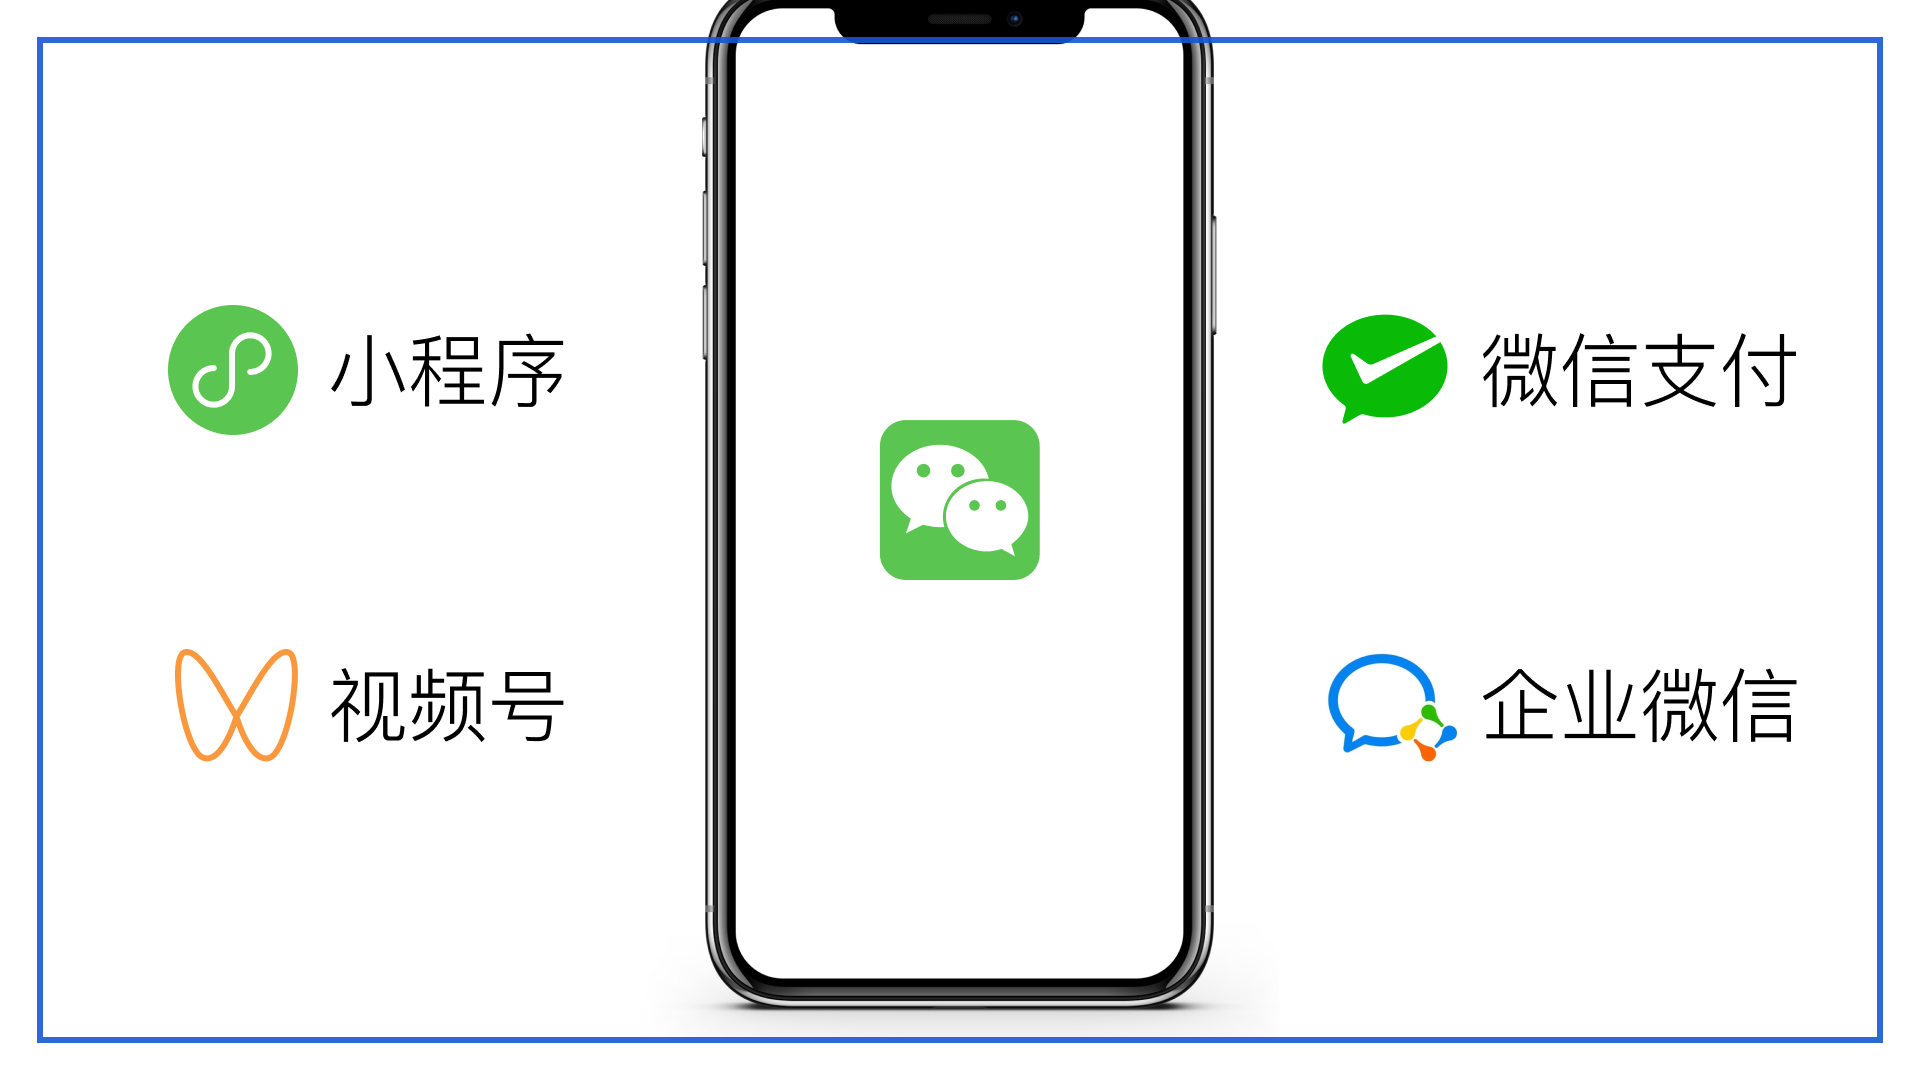 The WeChat ecosystem in WeChat application